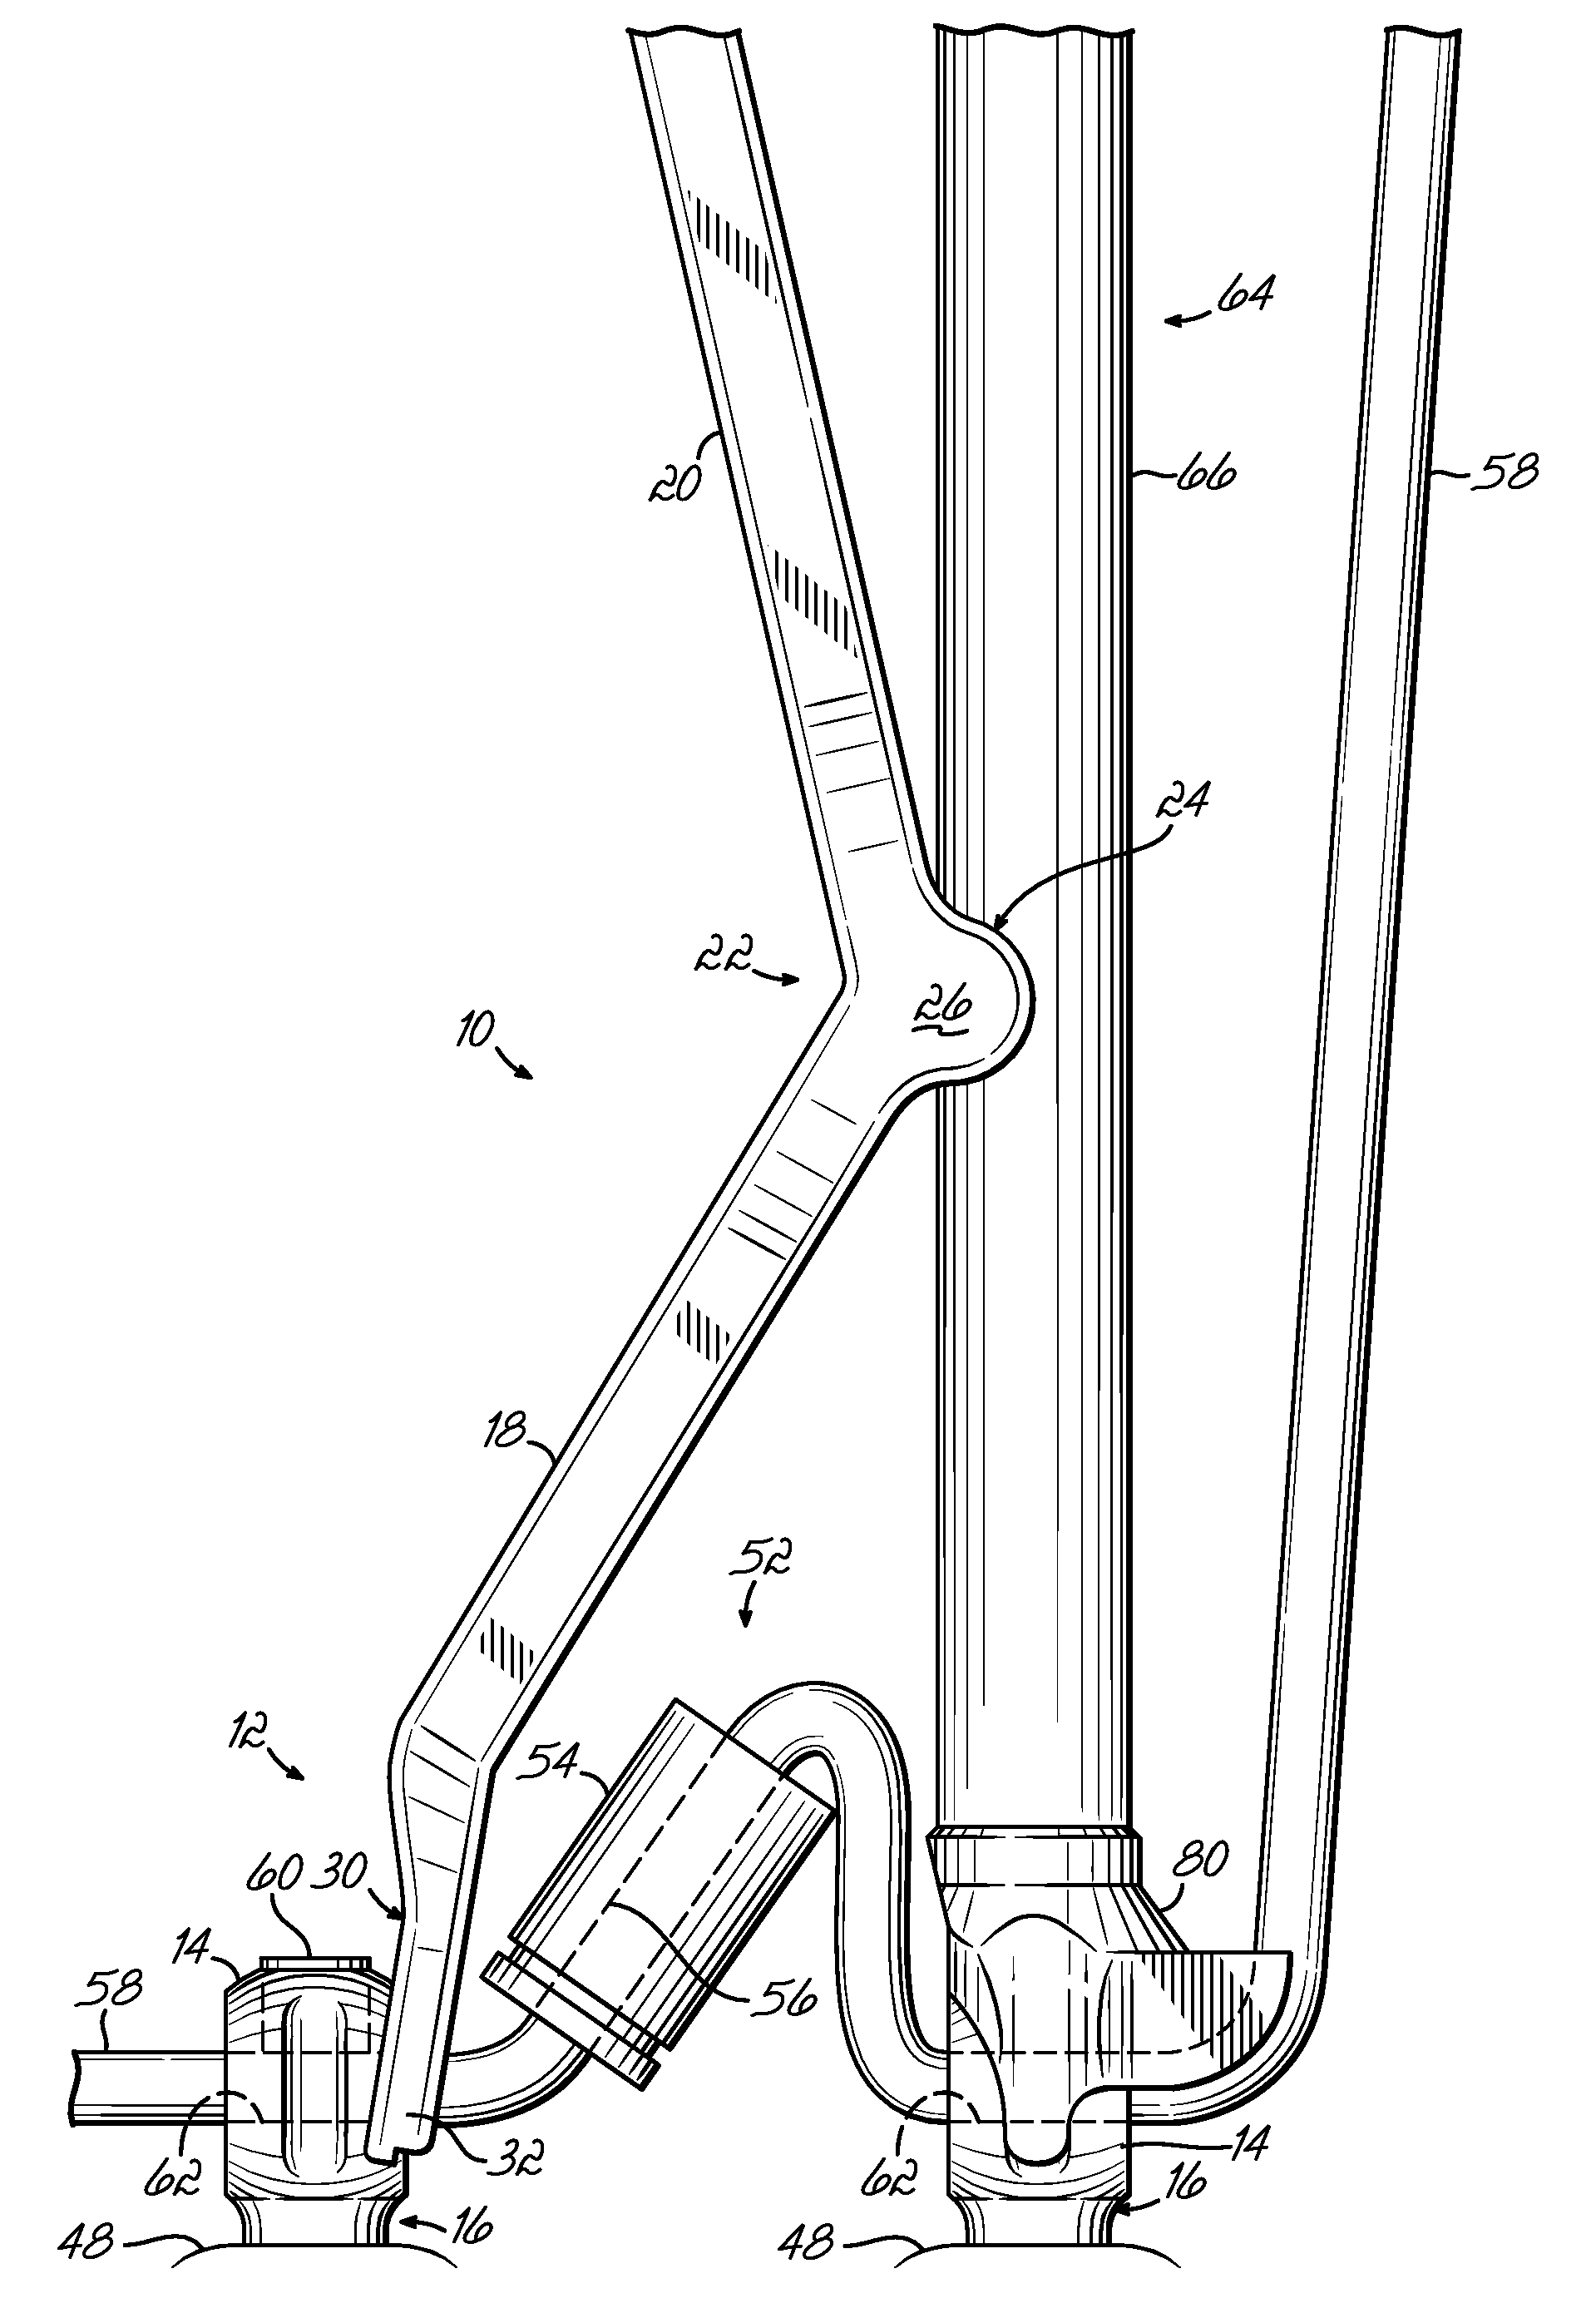 Pedicle screw distractor and associated method of use